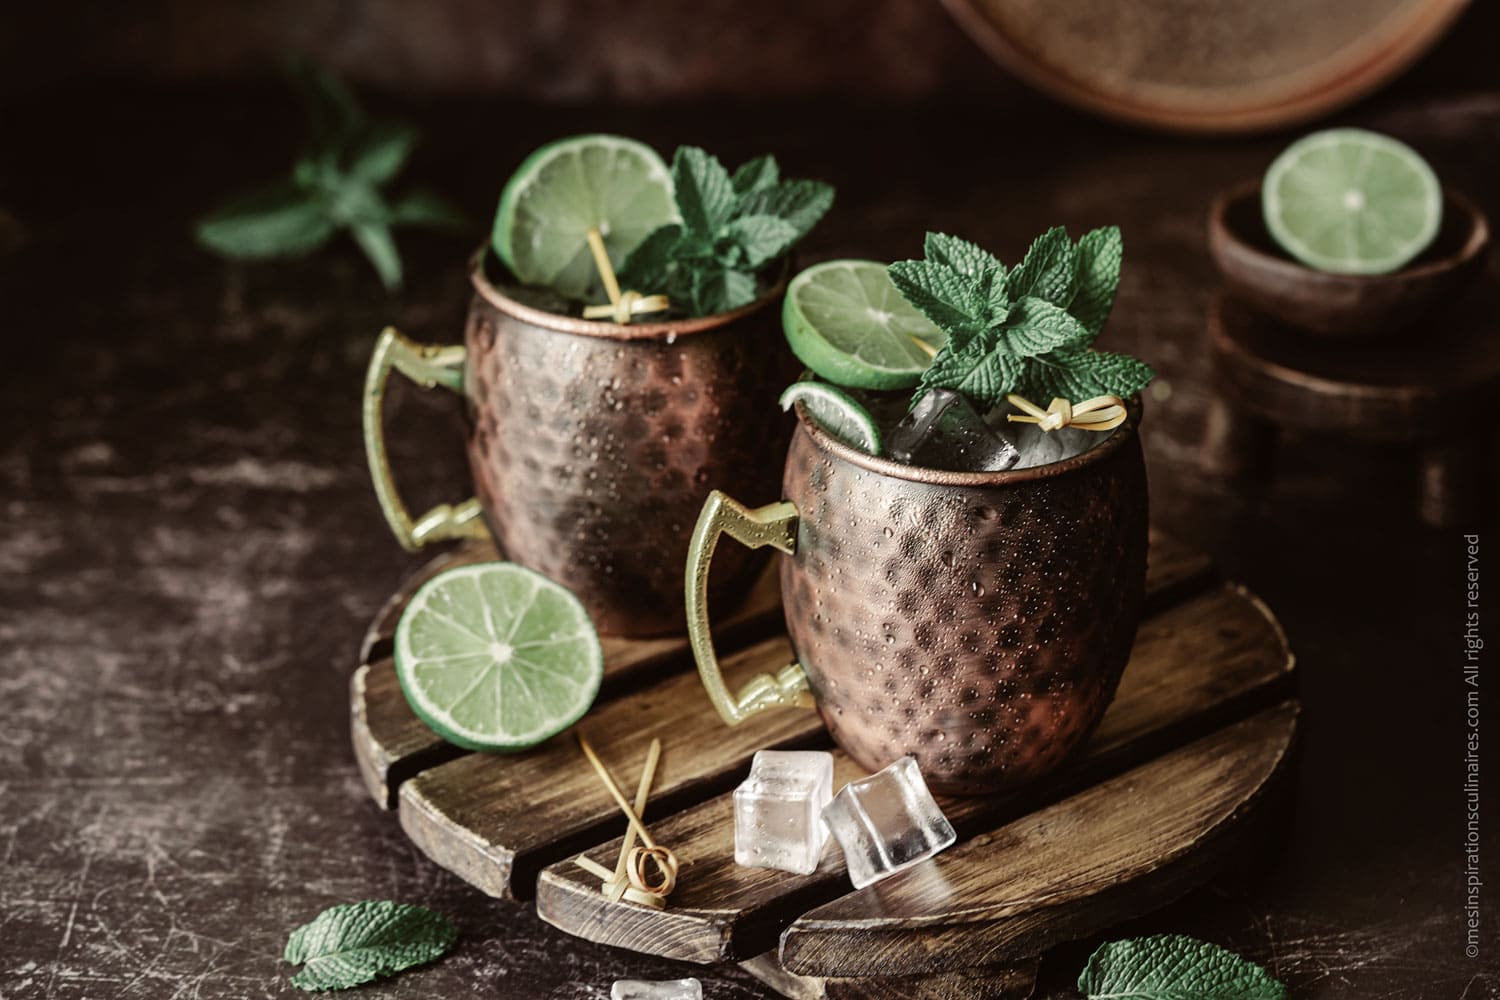 Recette du Moscow Mule ou cocktail ginger beer